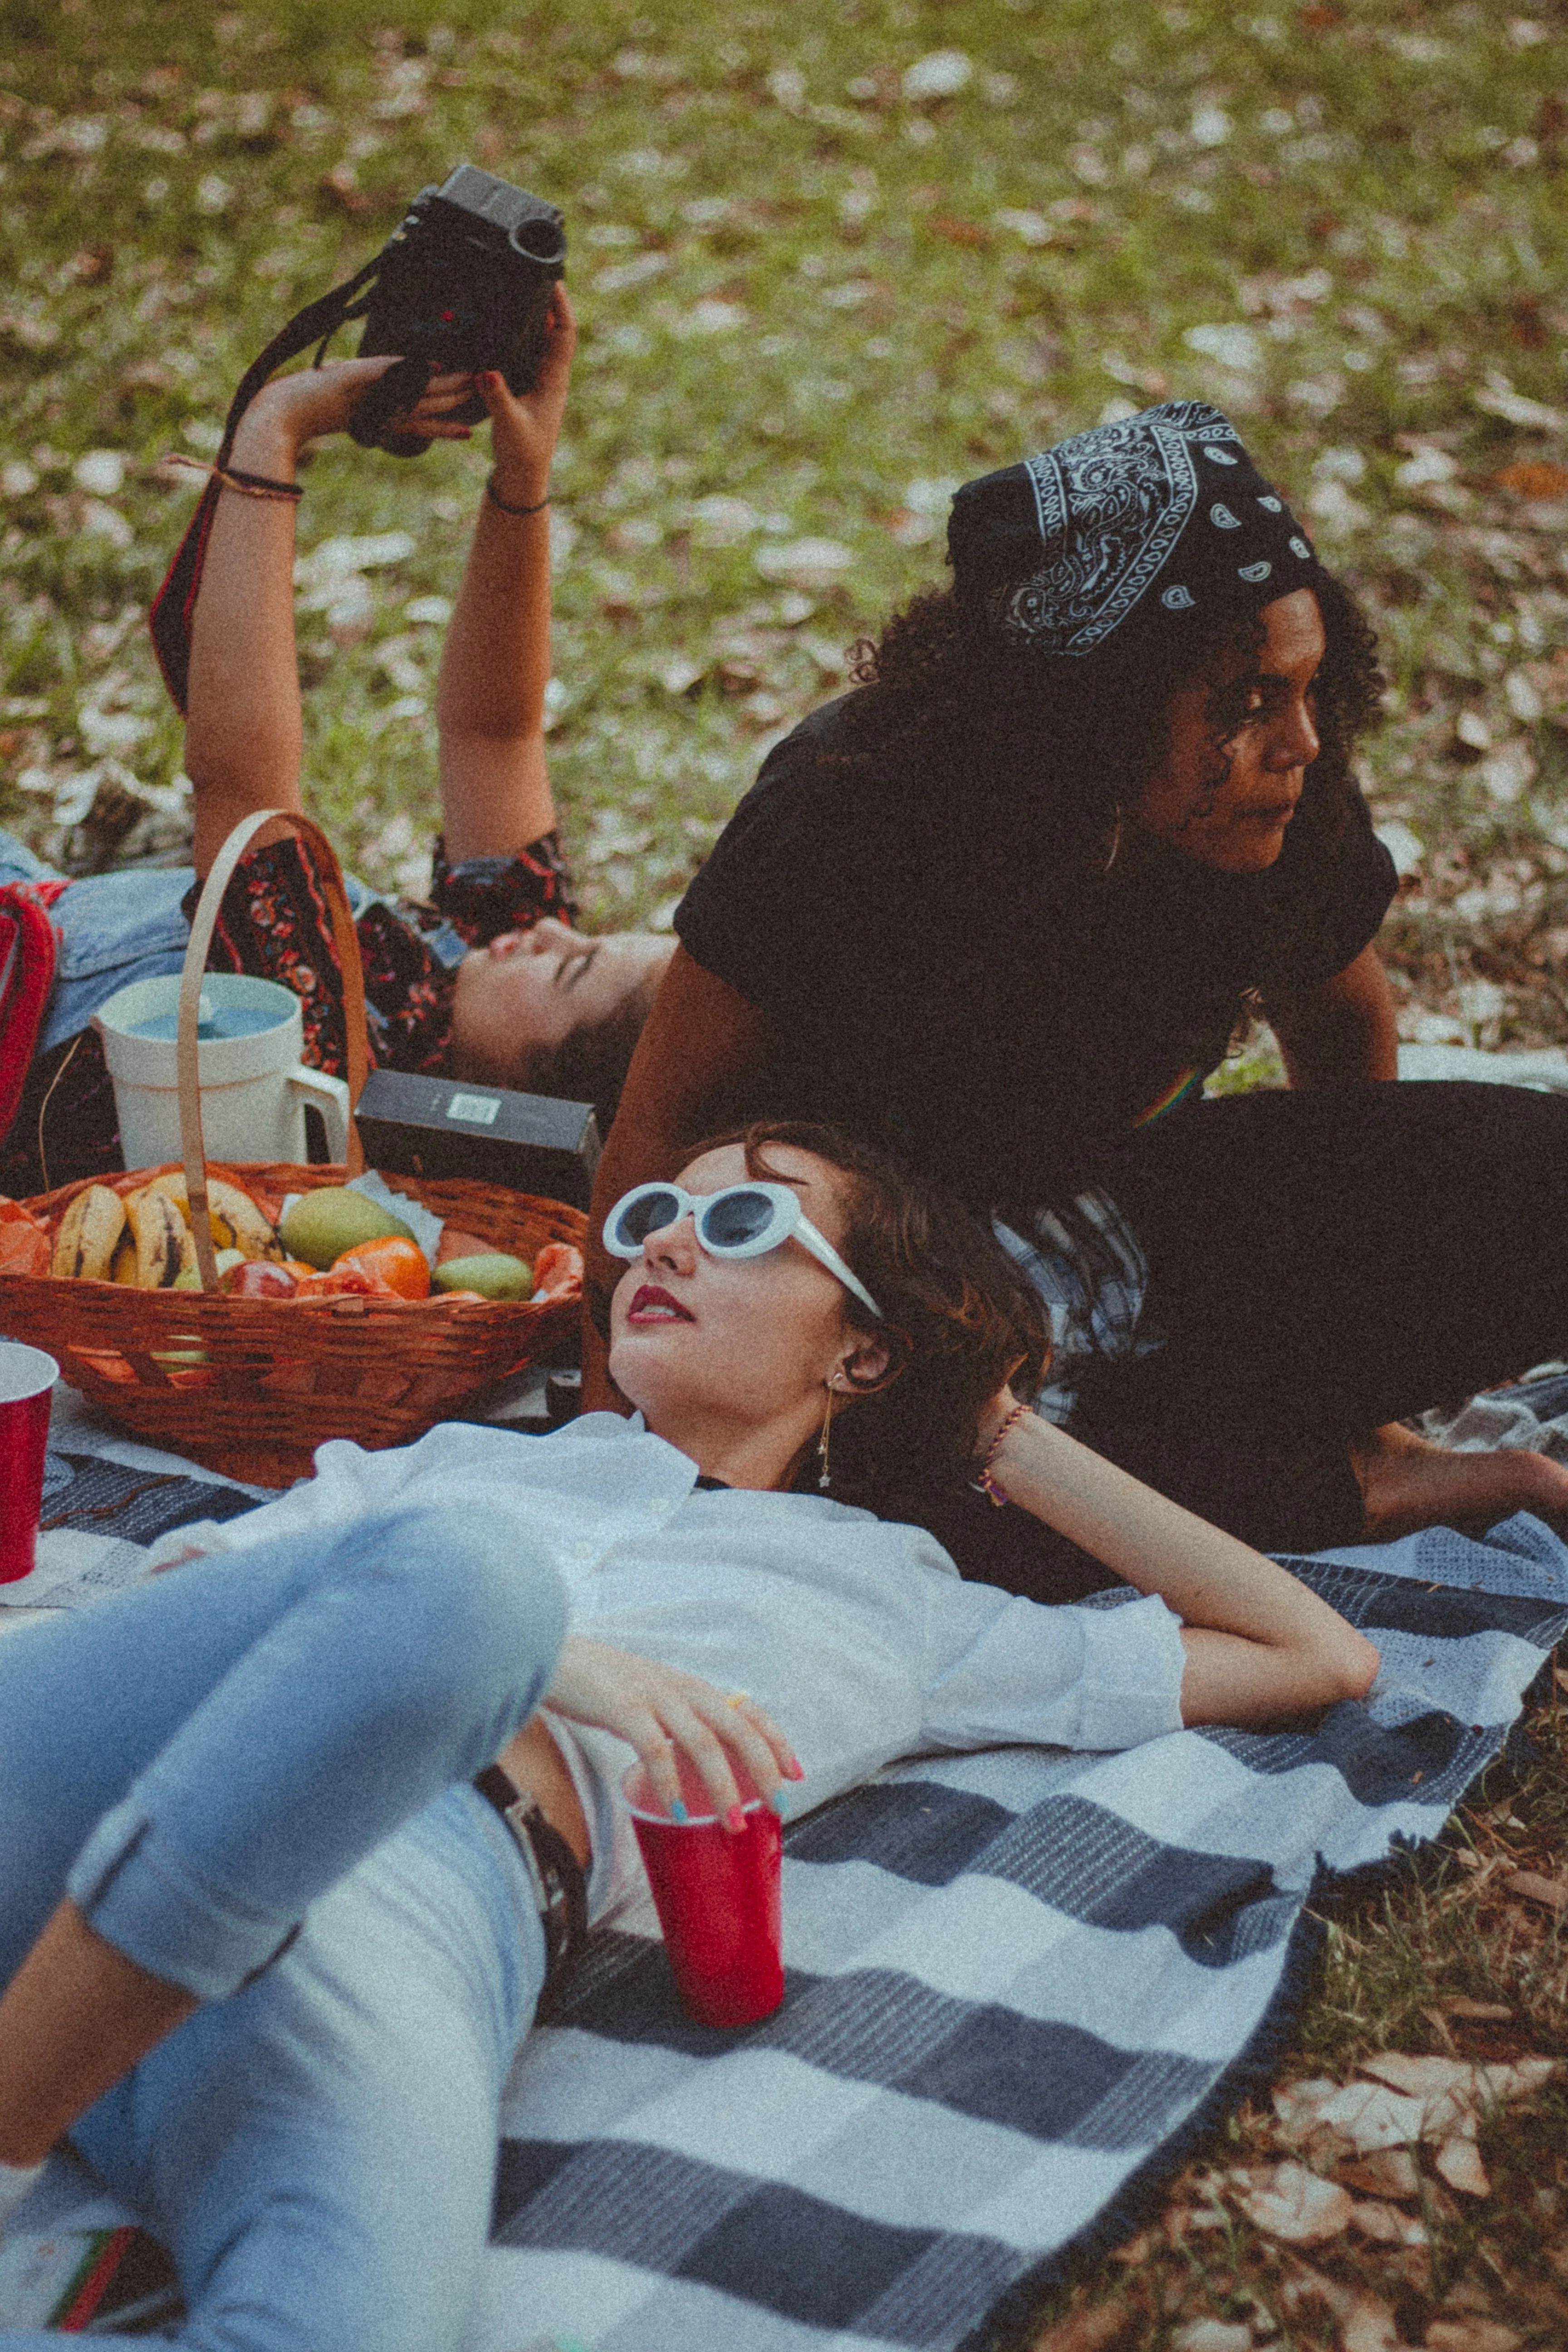 Three women sitting on a picnic blanket outdoors